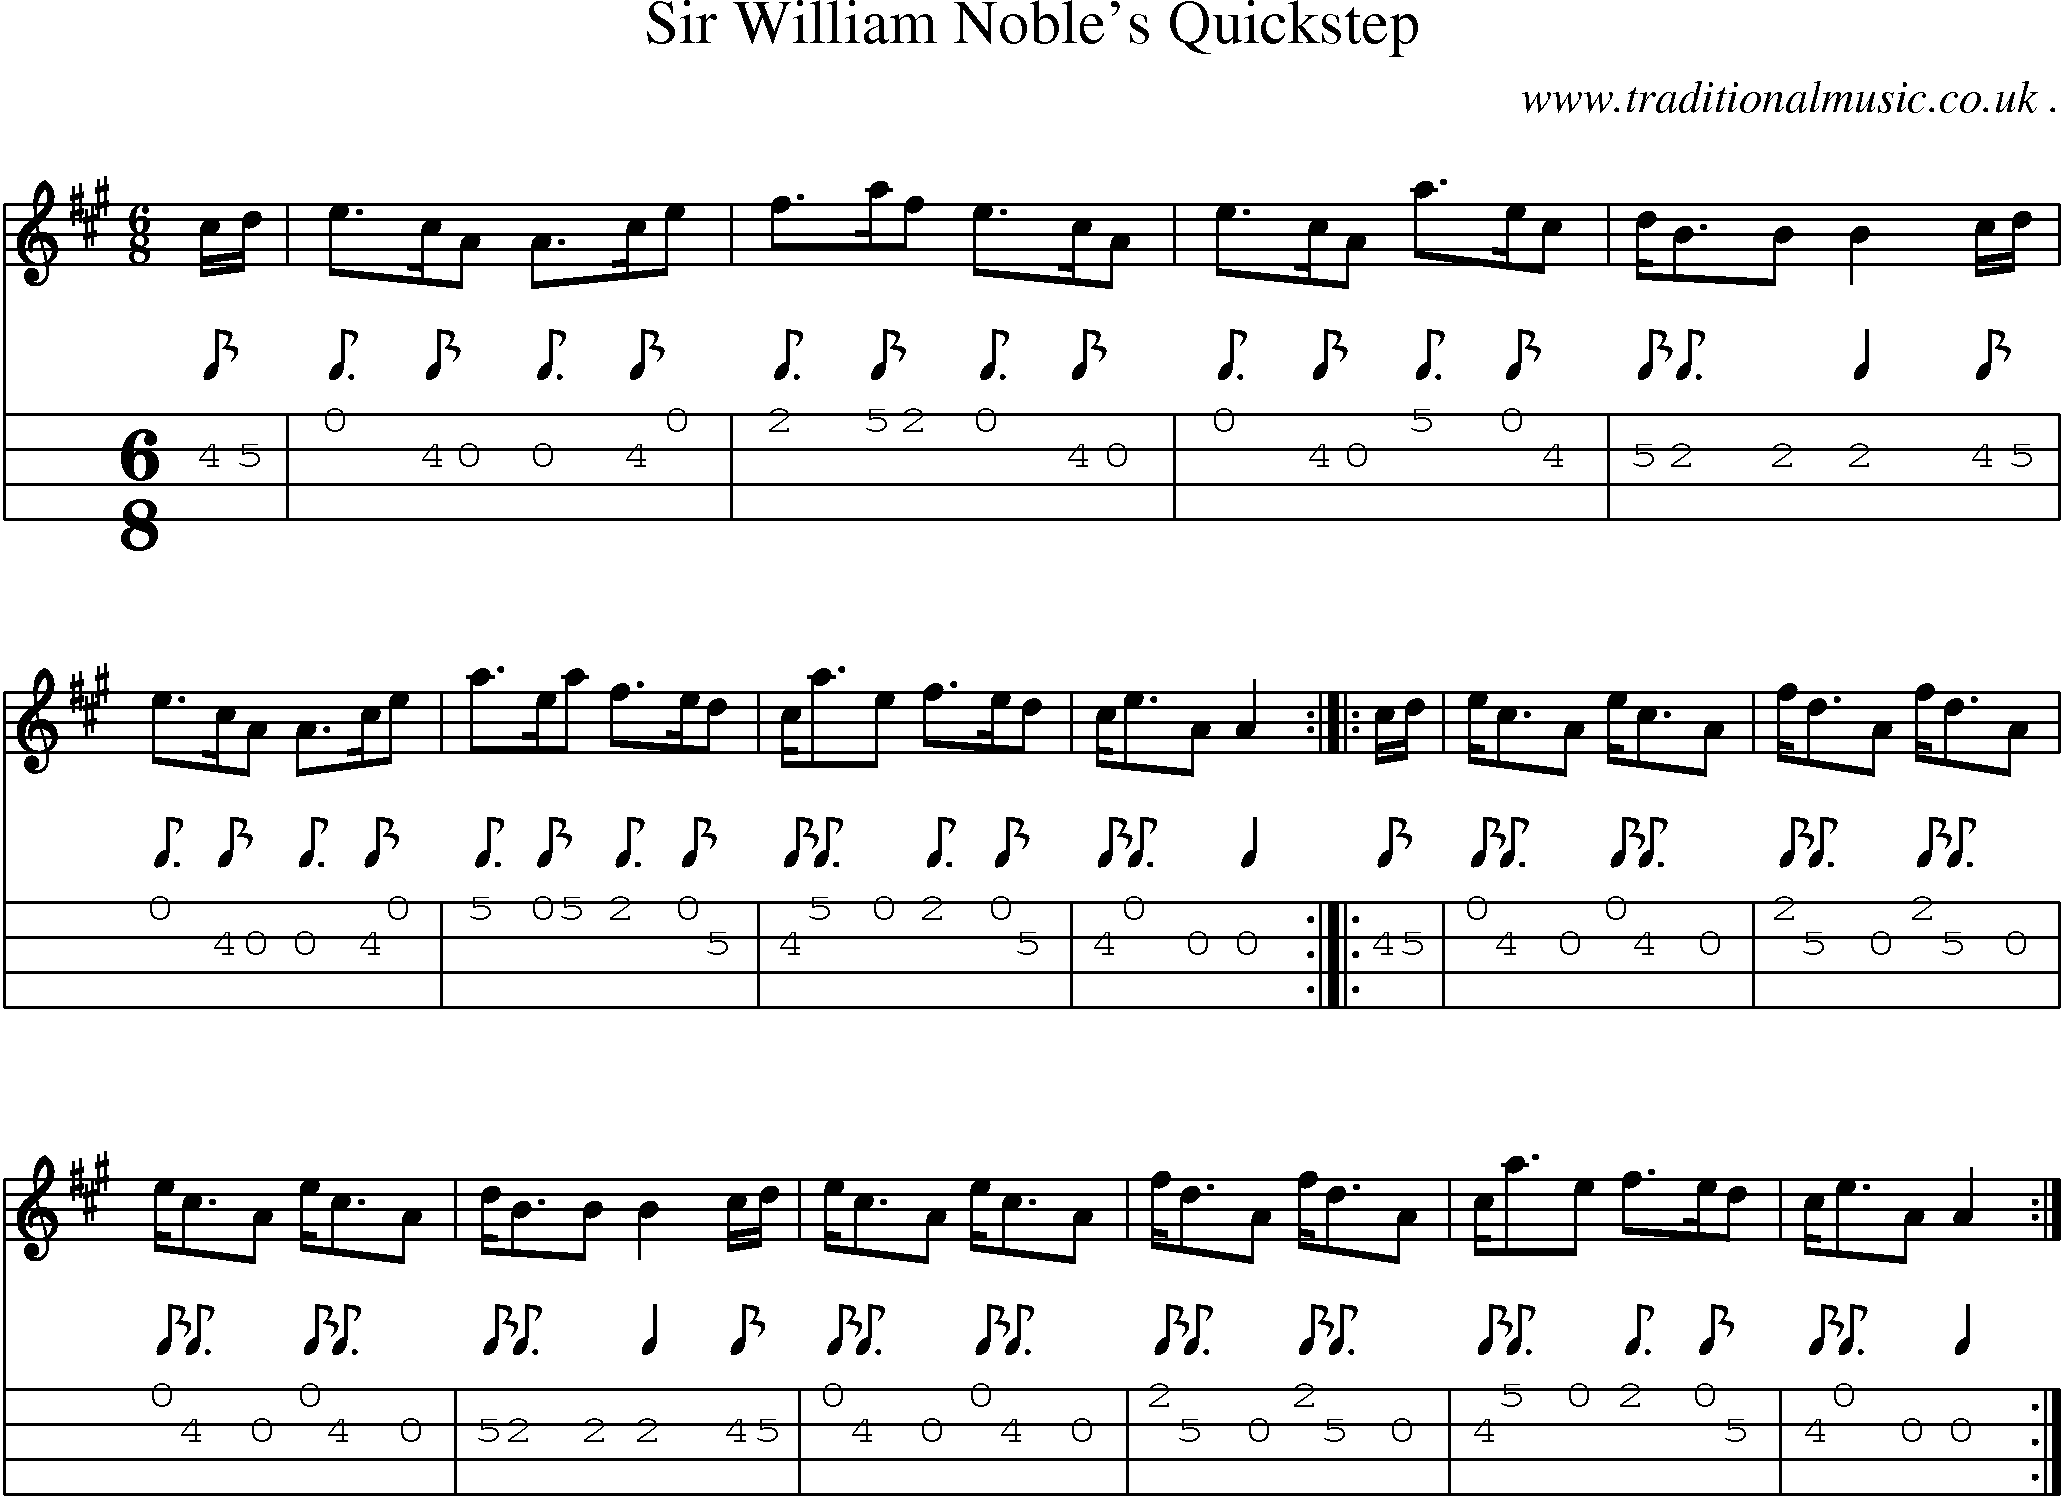 Sheet-music  score, Chords and Mandolin Tabs for Sir William Nobles Quickstep